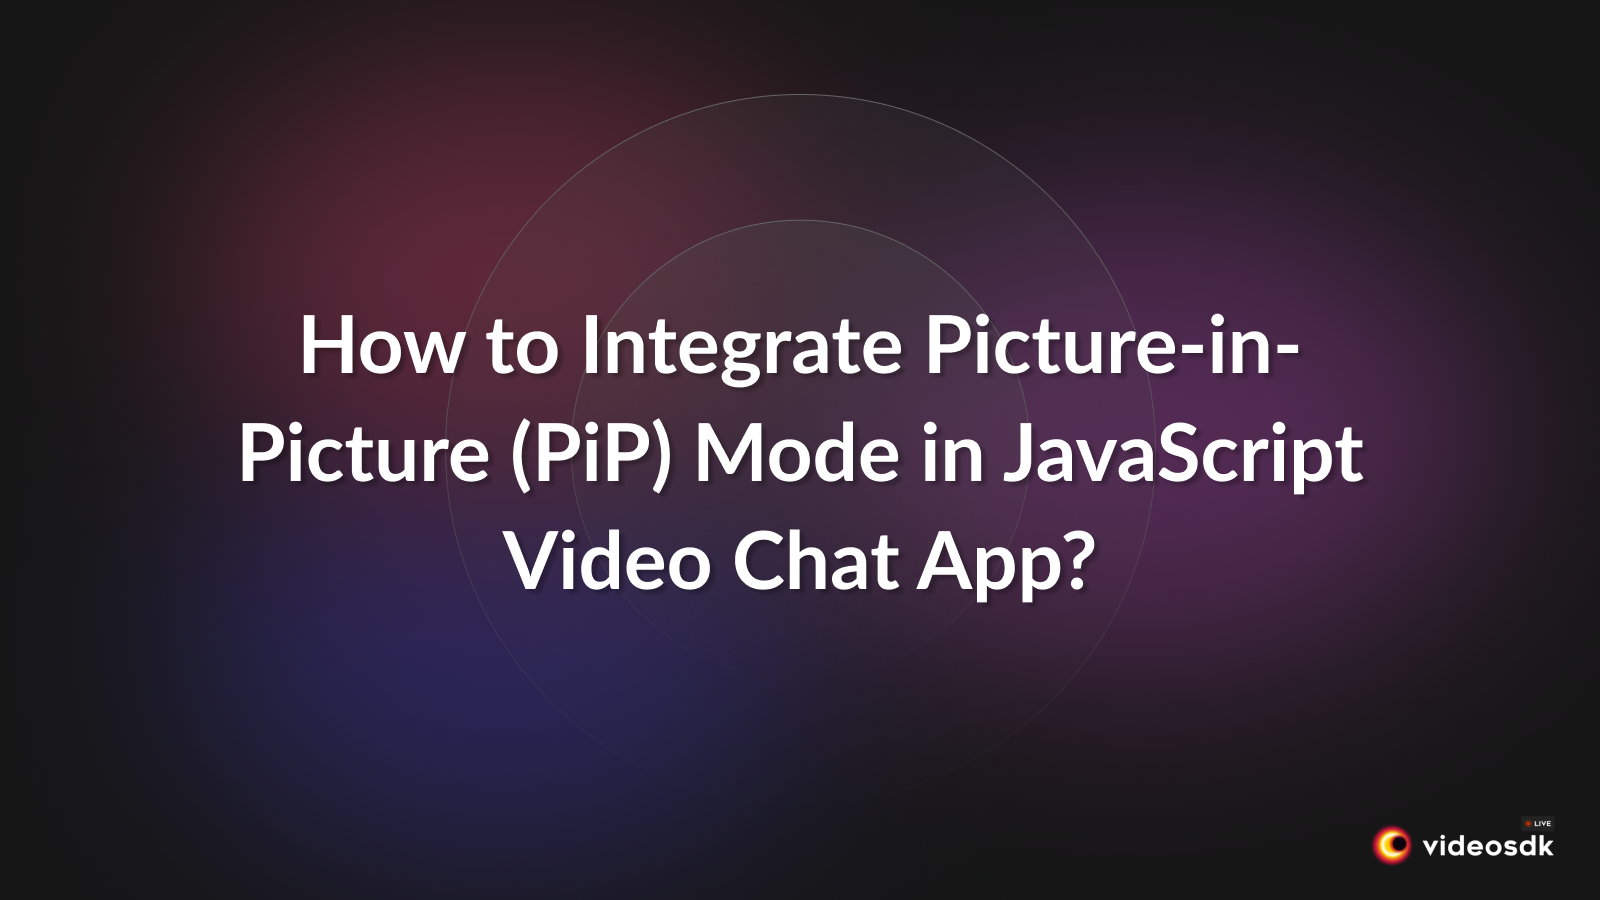 How to Integrate Picture-in-Picture (PiP) Mode in JavaScript Video Chat App?